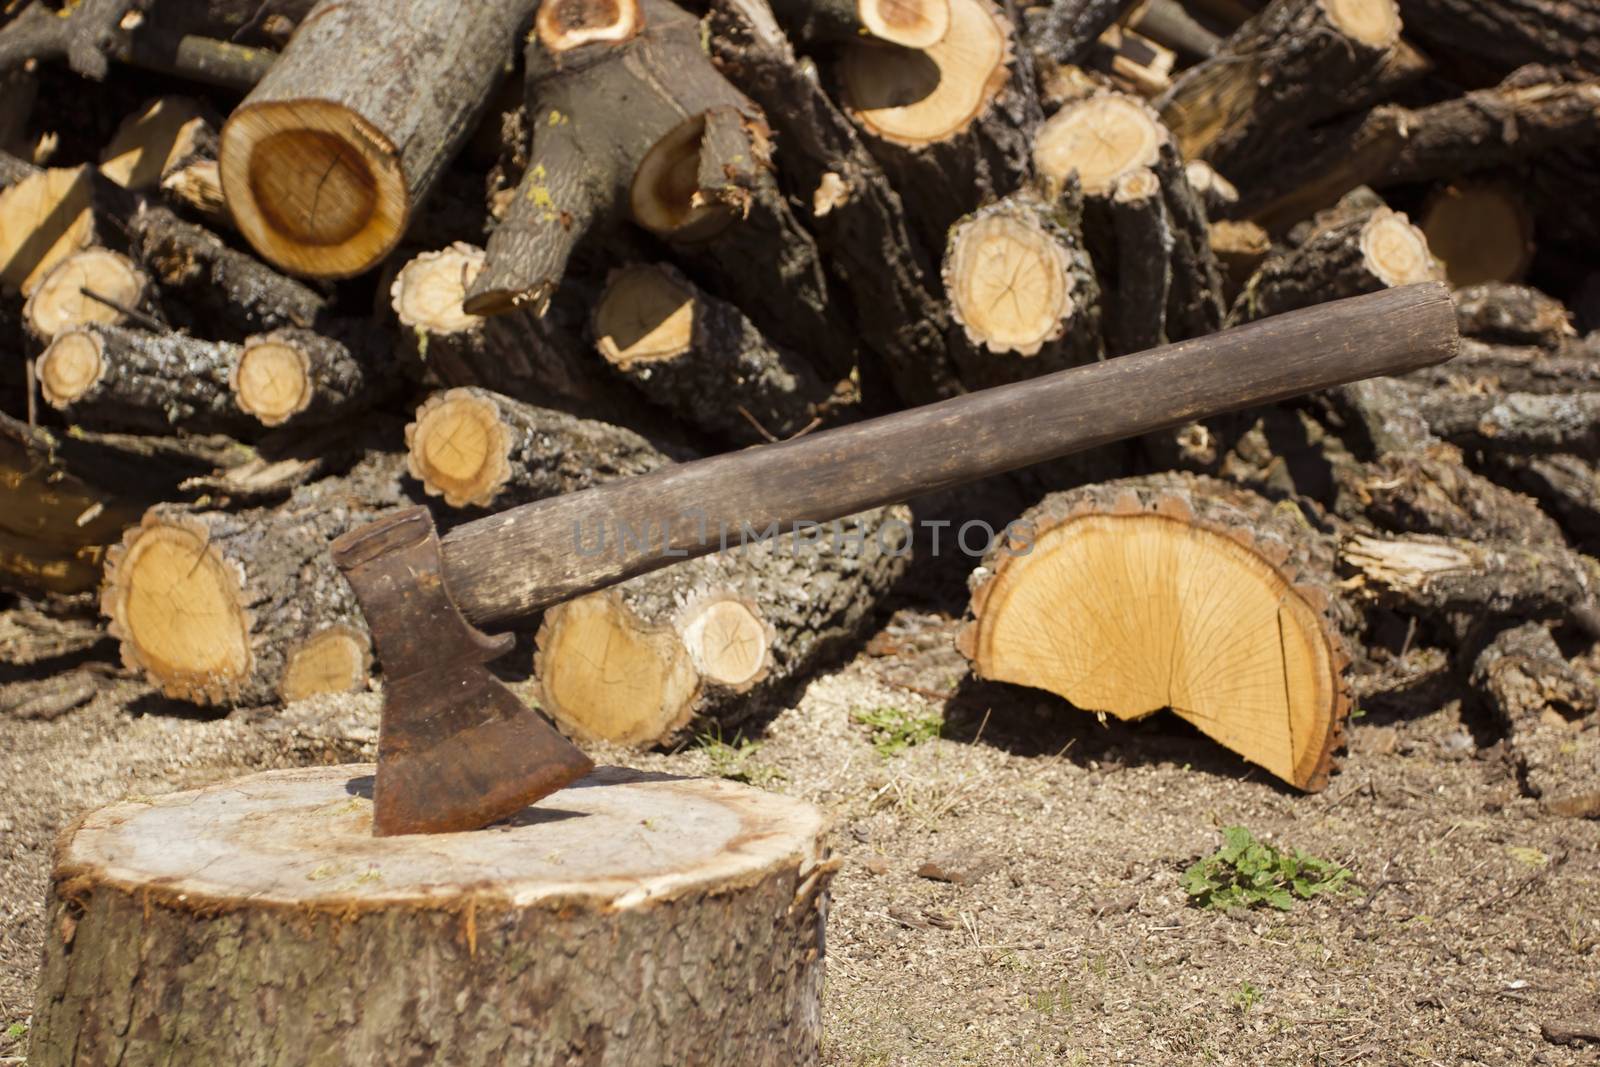 Close up shot of an axe in a stump with firewood in the background.